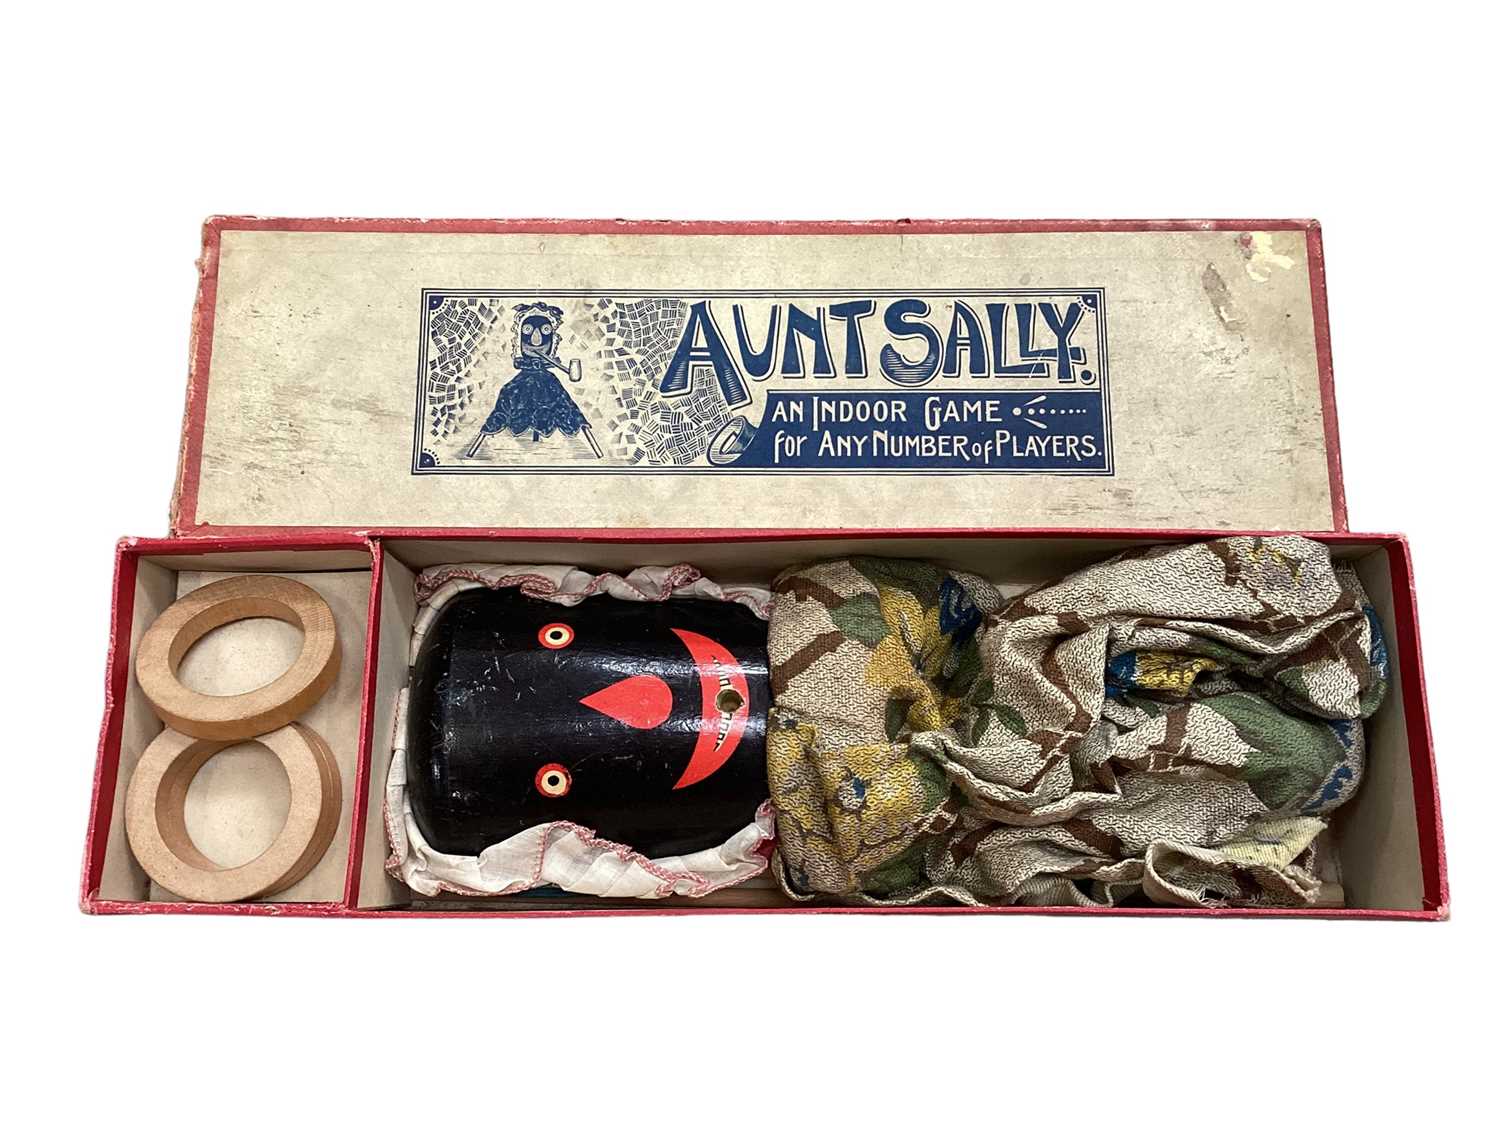 Vintage 'Aunt Sally' game in original box, The Game of Schimmell or Bell & Hammer, together with Spe